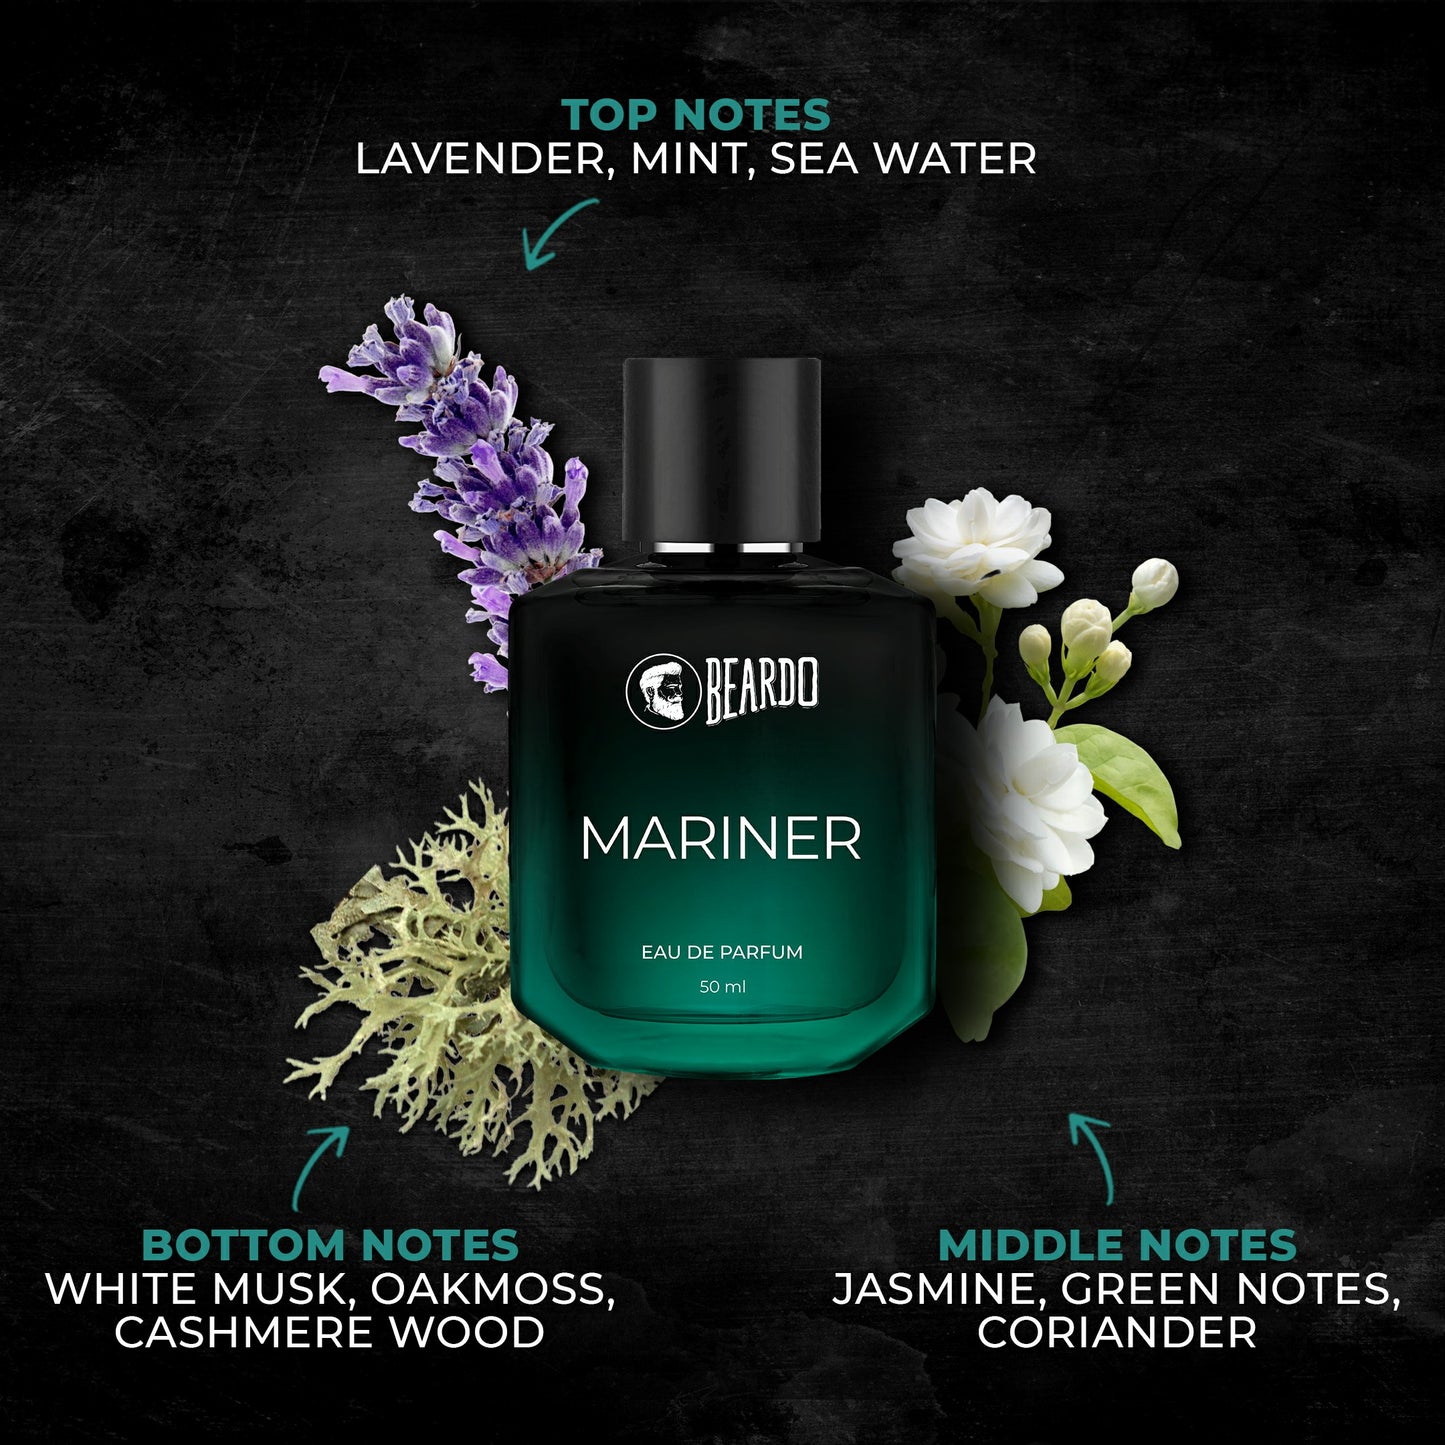 jasmine notes, white musk, cashmere wood, sea water